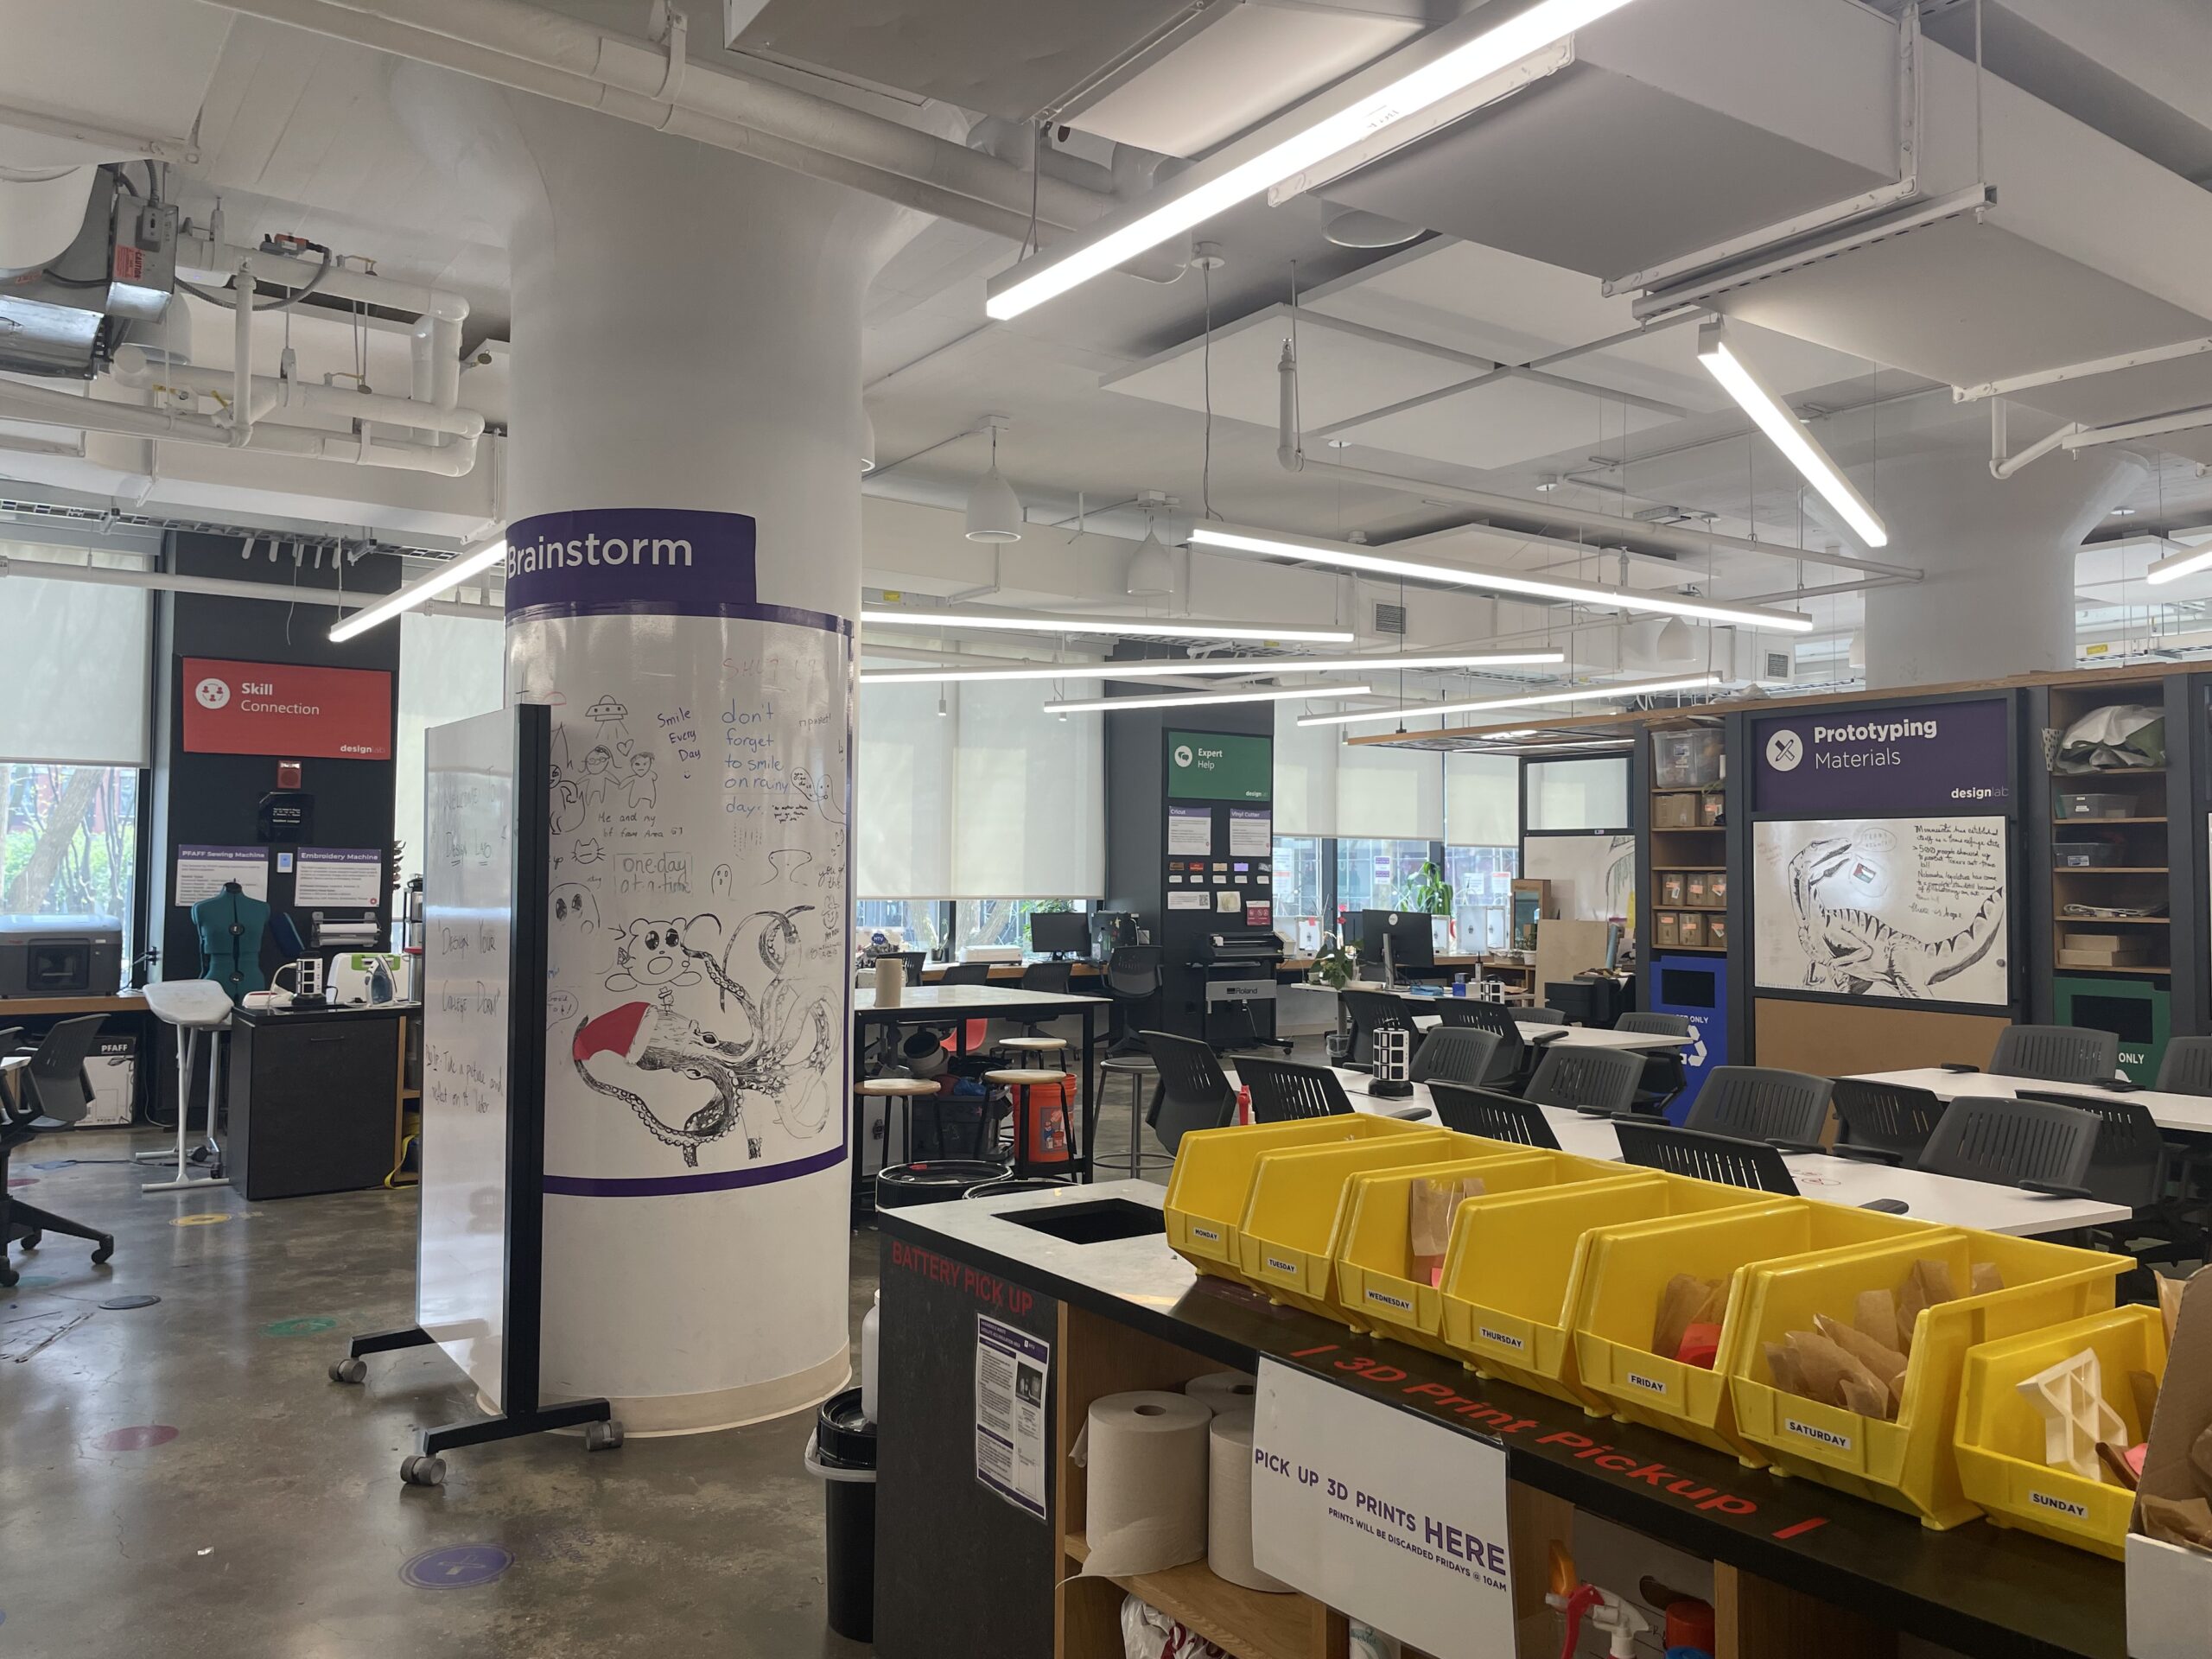 The workspace and pickup area for 3D prints at the NYU MakerSpace.